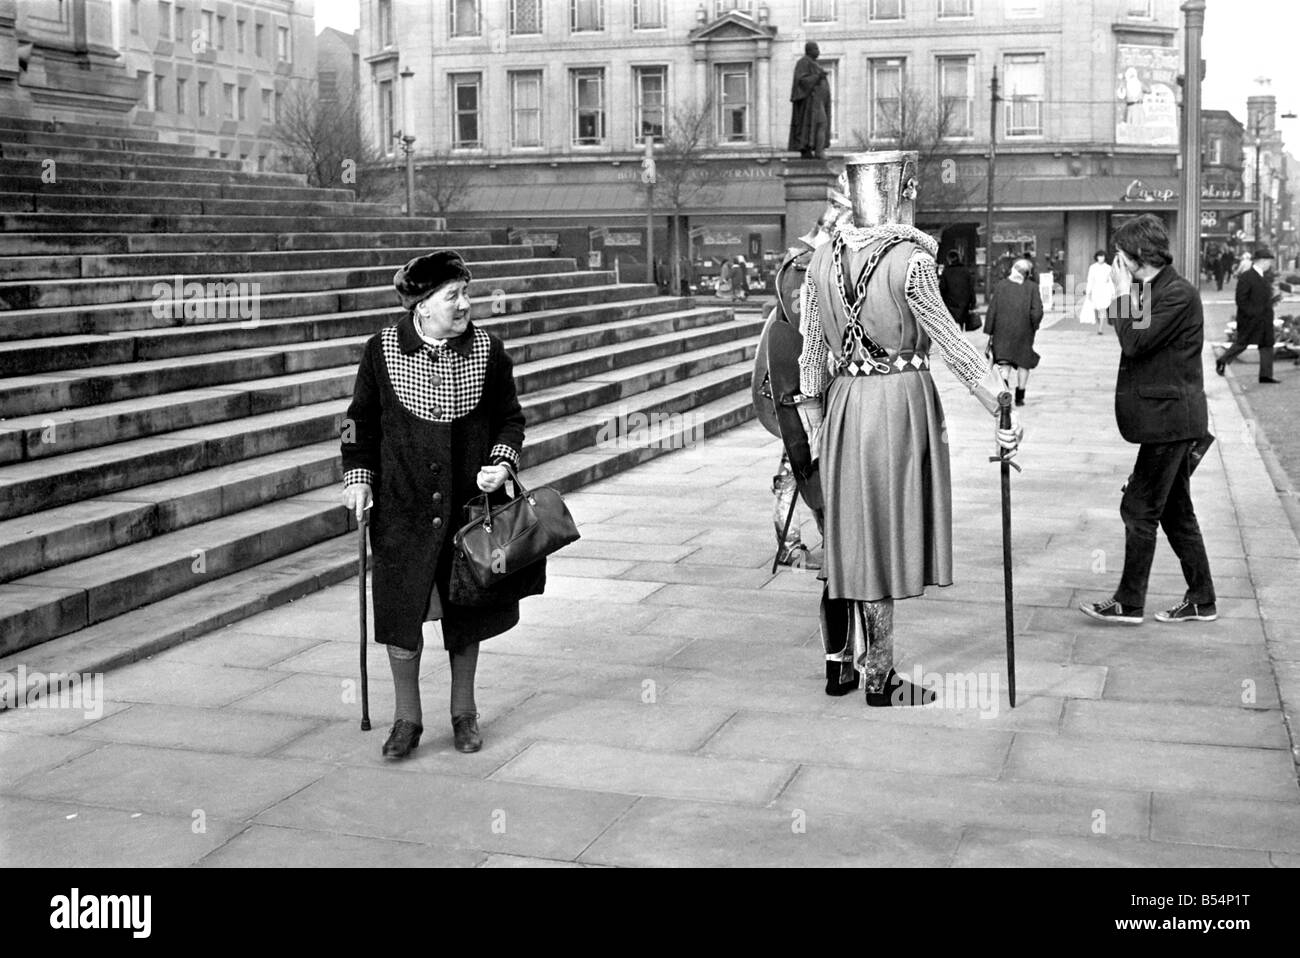 Shoppers hurry past the Town Hall steps as a couple of medieval knights are locked in combat in Bolton. The battle was being filmed by the Bolton Octagan Theatre Company. December 1969 Z11749-002 Stock Photo